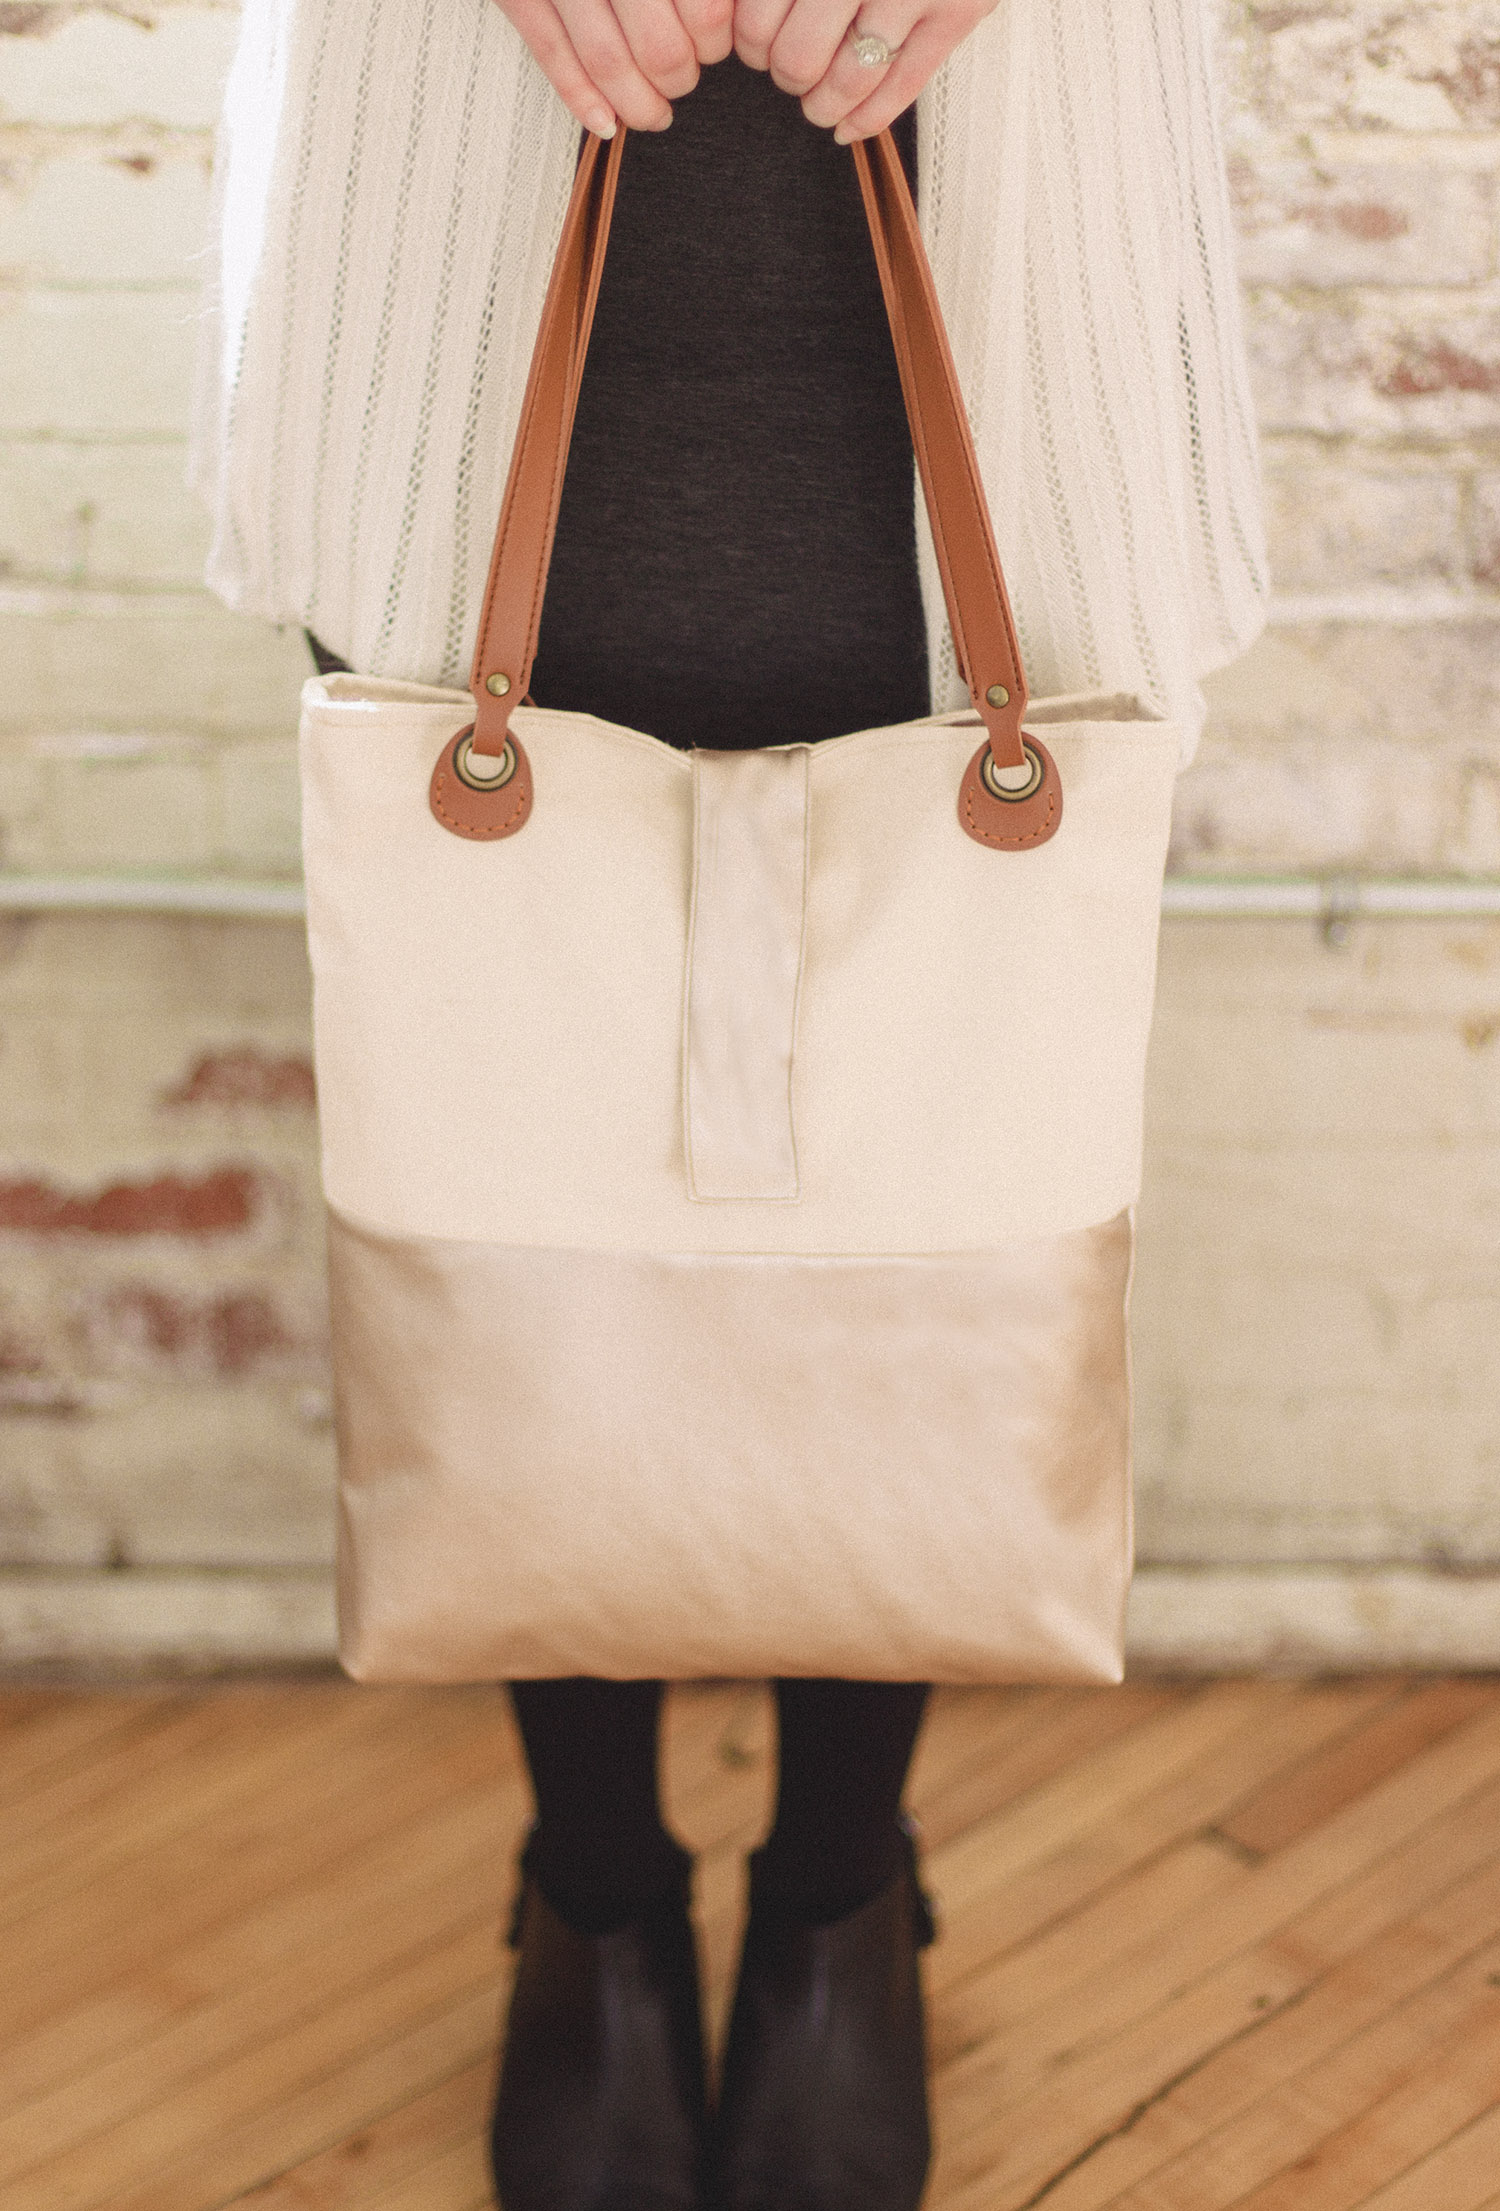 Handmade Cloth Bag - Reuseable Market Tote - Greenhive Collective